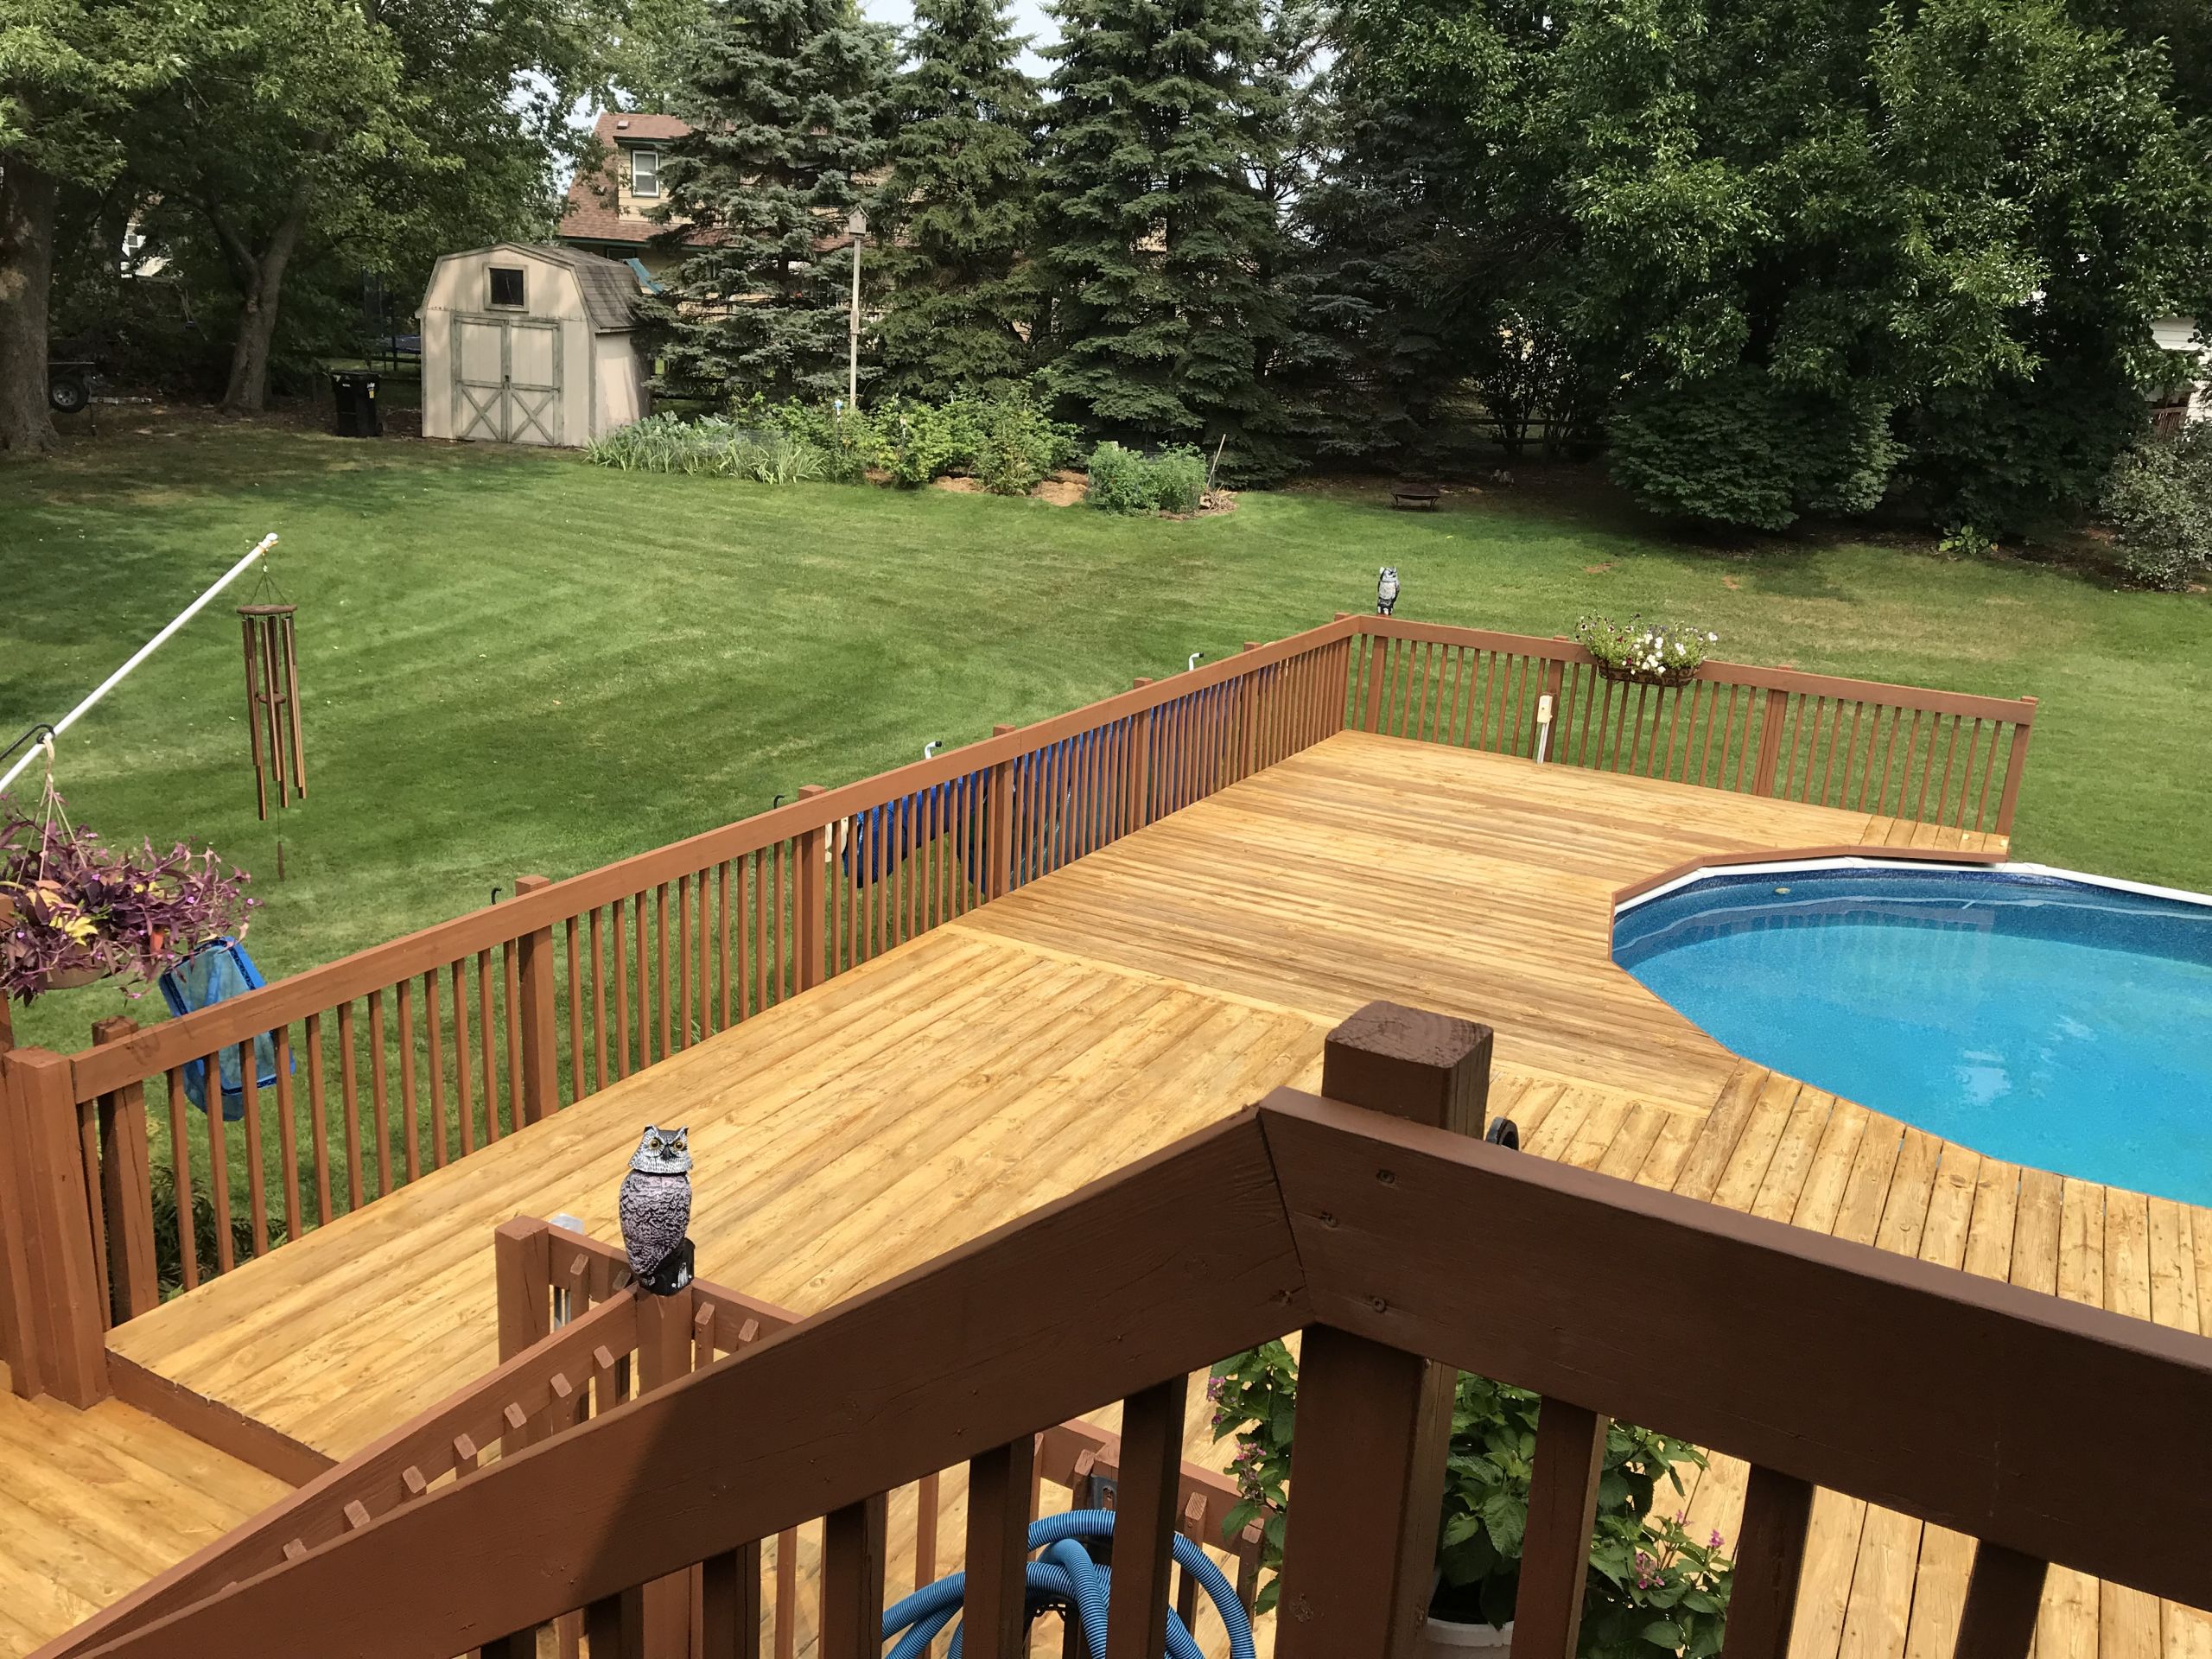 Wood Deck Paint Reviews
 Restore A Deck Wood Stain Review